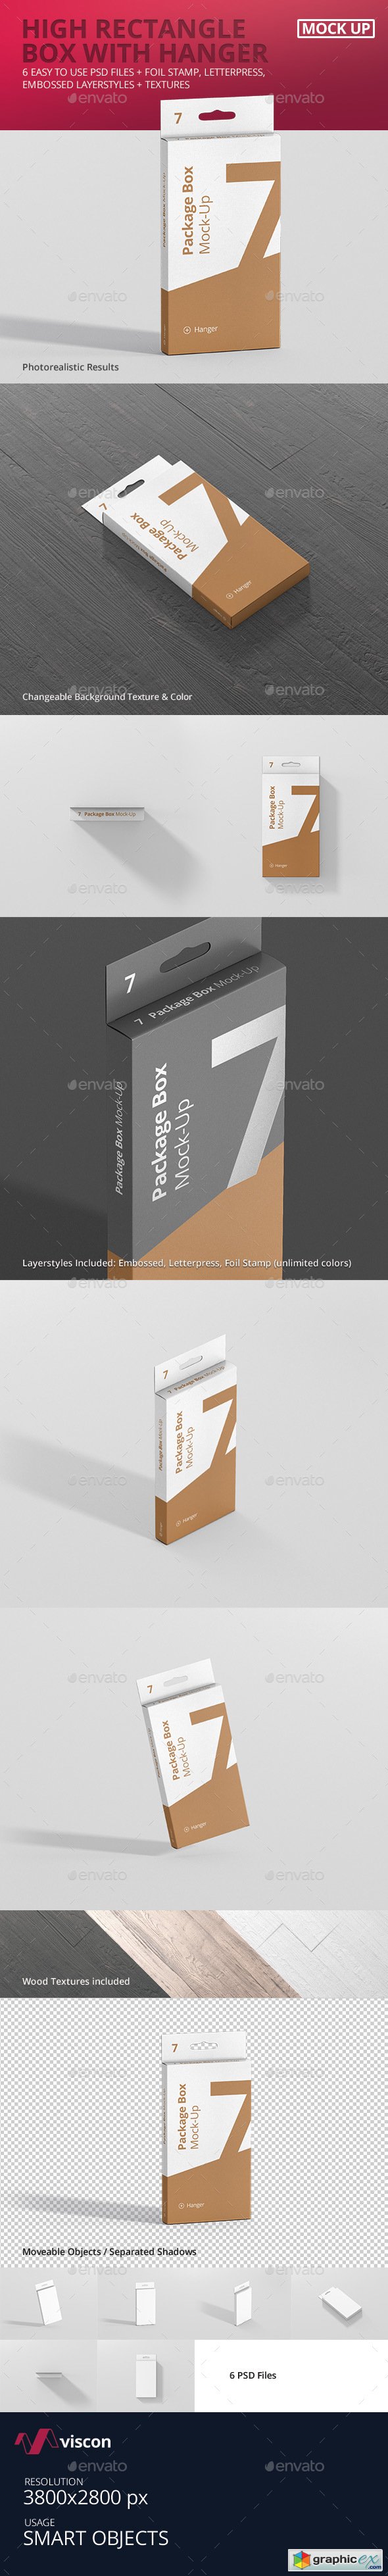 Package Box Mock-Up - High Rectangle with Hanger